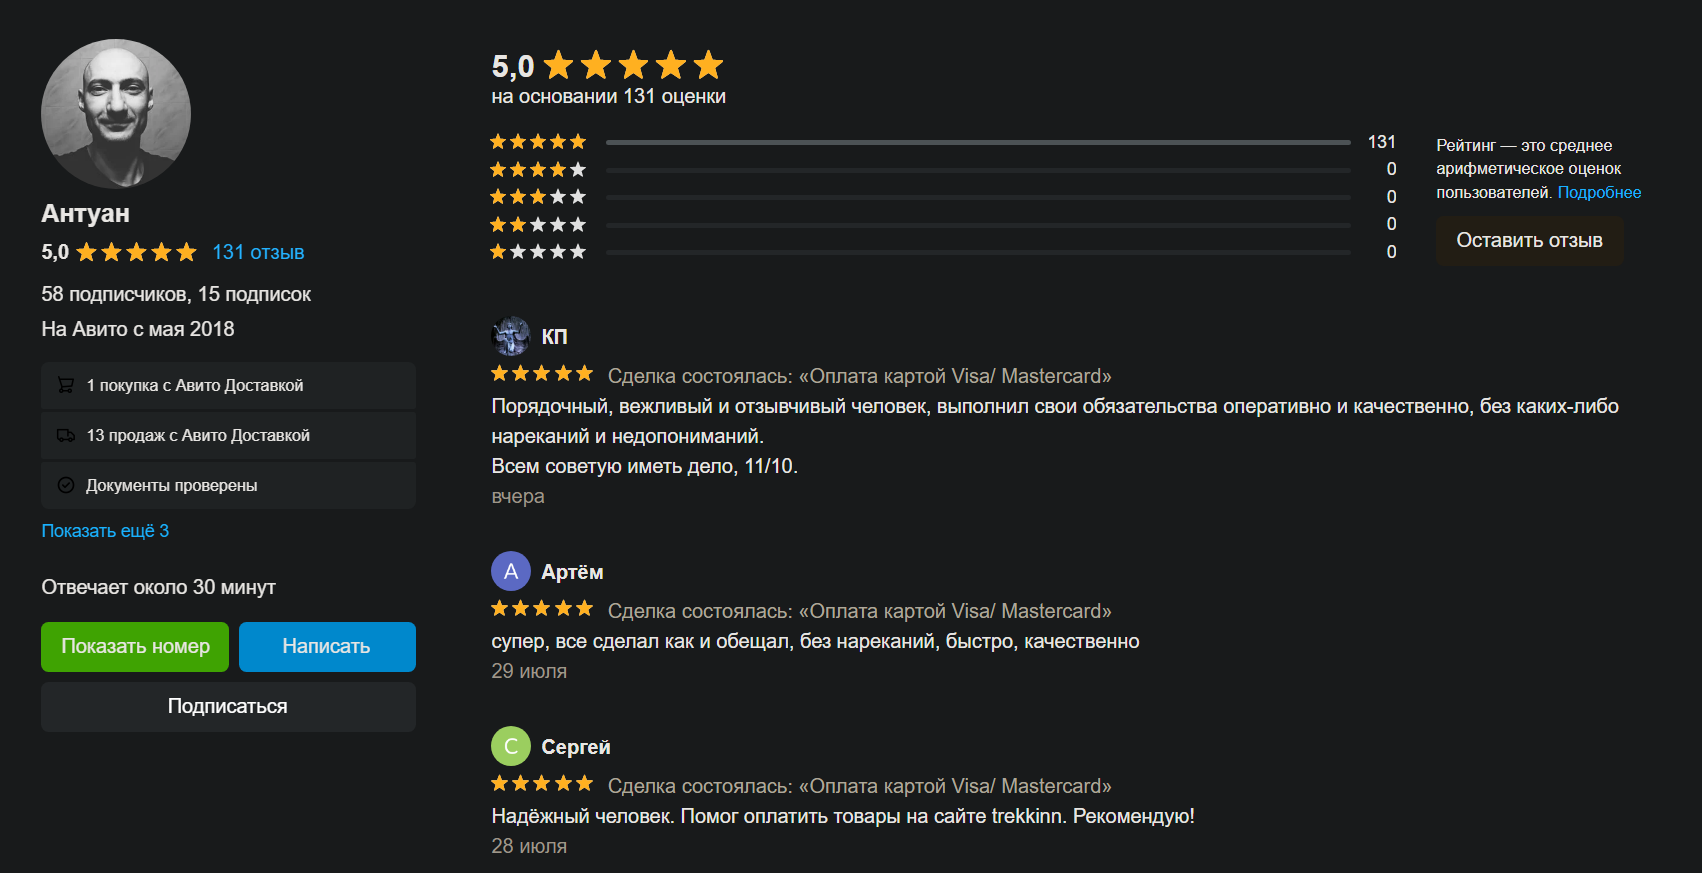 One such Avito seller, with over one hundred 5 star reviews.